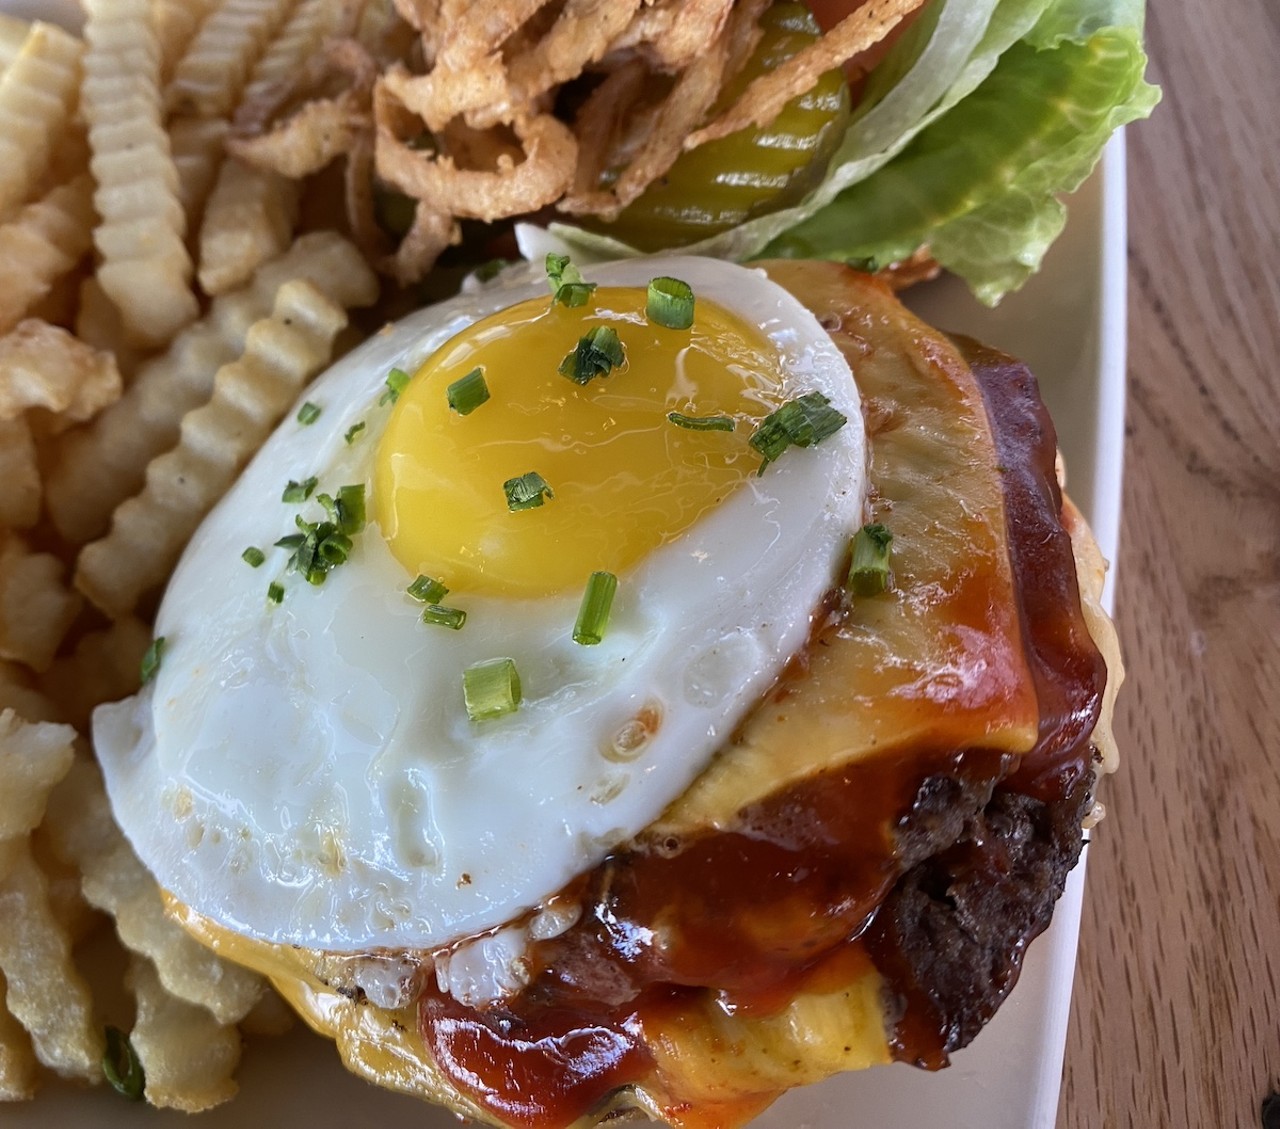 
Splitsville
615 Channelside Dr. Suite 120, Tampa
K-Town Burger: Two 4 oz. patties dressed with American cheese, crispy bacon, fried onions and our own "Awesome Sauce." Plus kimchi mayo and a fried egg on a sweet Hawaiian roll. ($TBD)
Photo courtesy of Splitsville